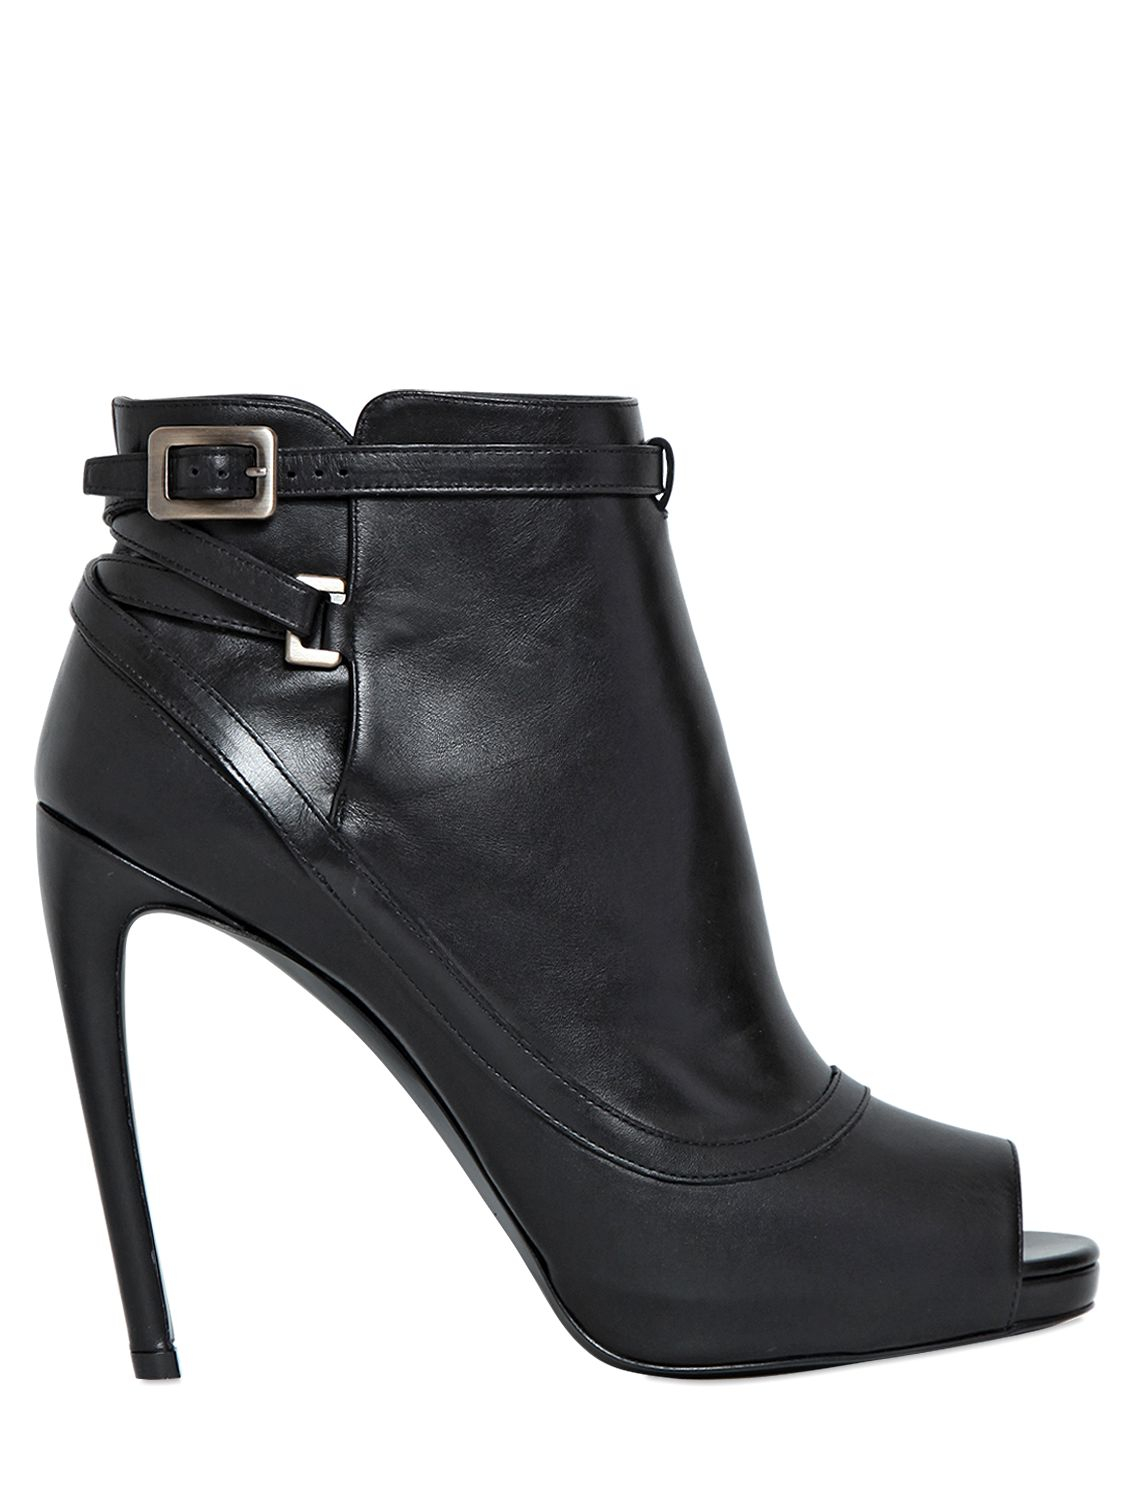 Roger vivier 115mm Peep Toe Leather Ankle Boots in Black | Lyst